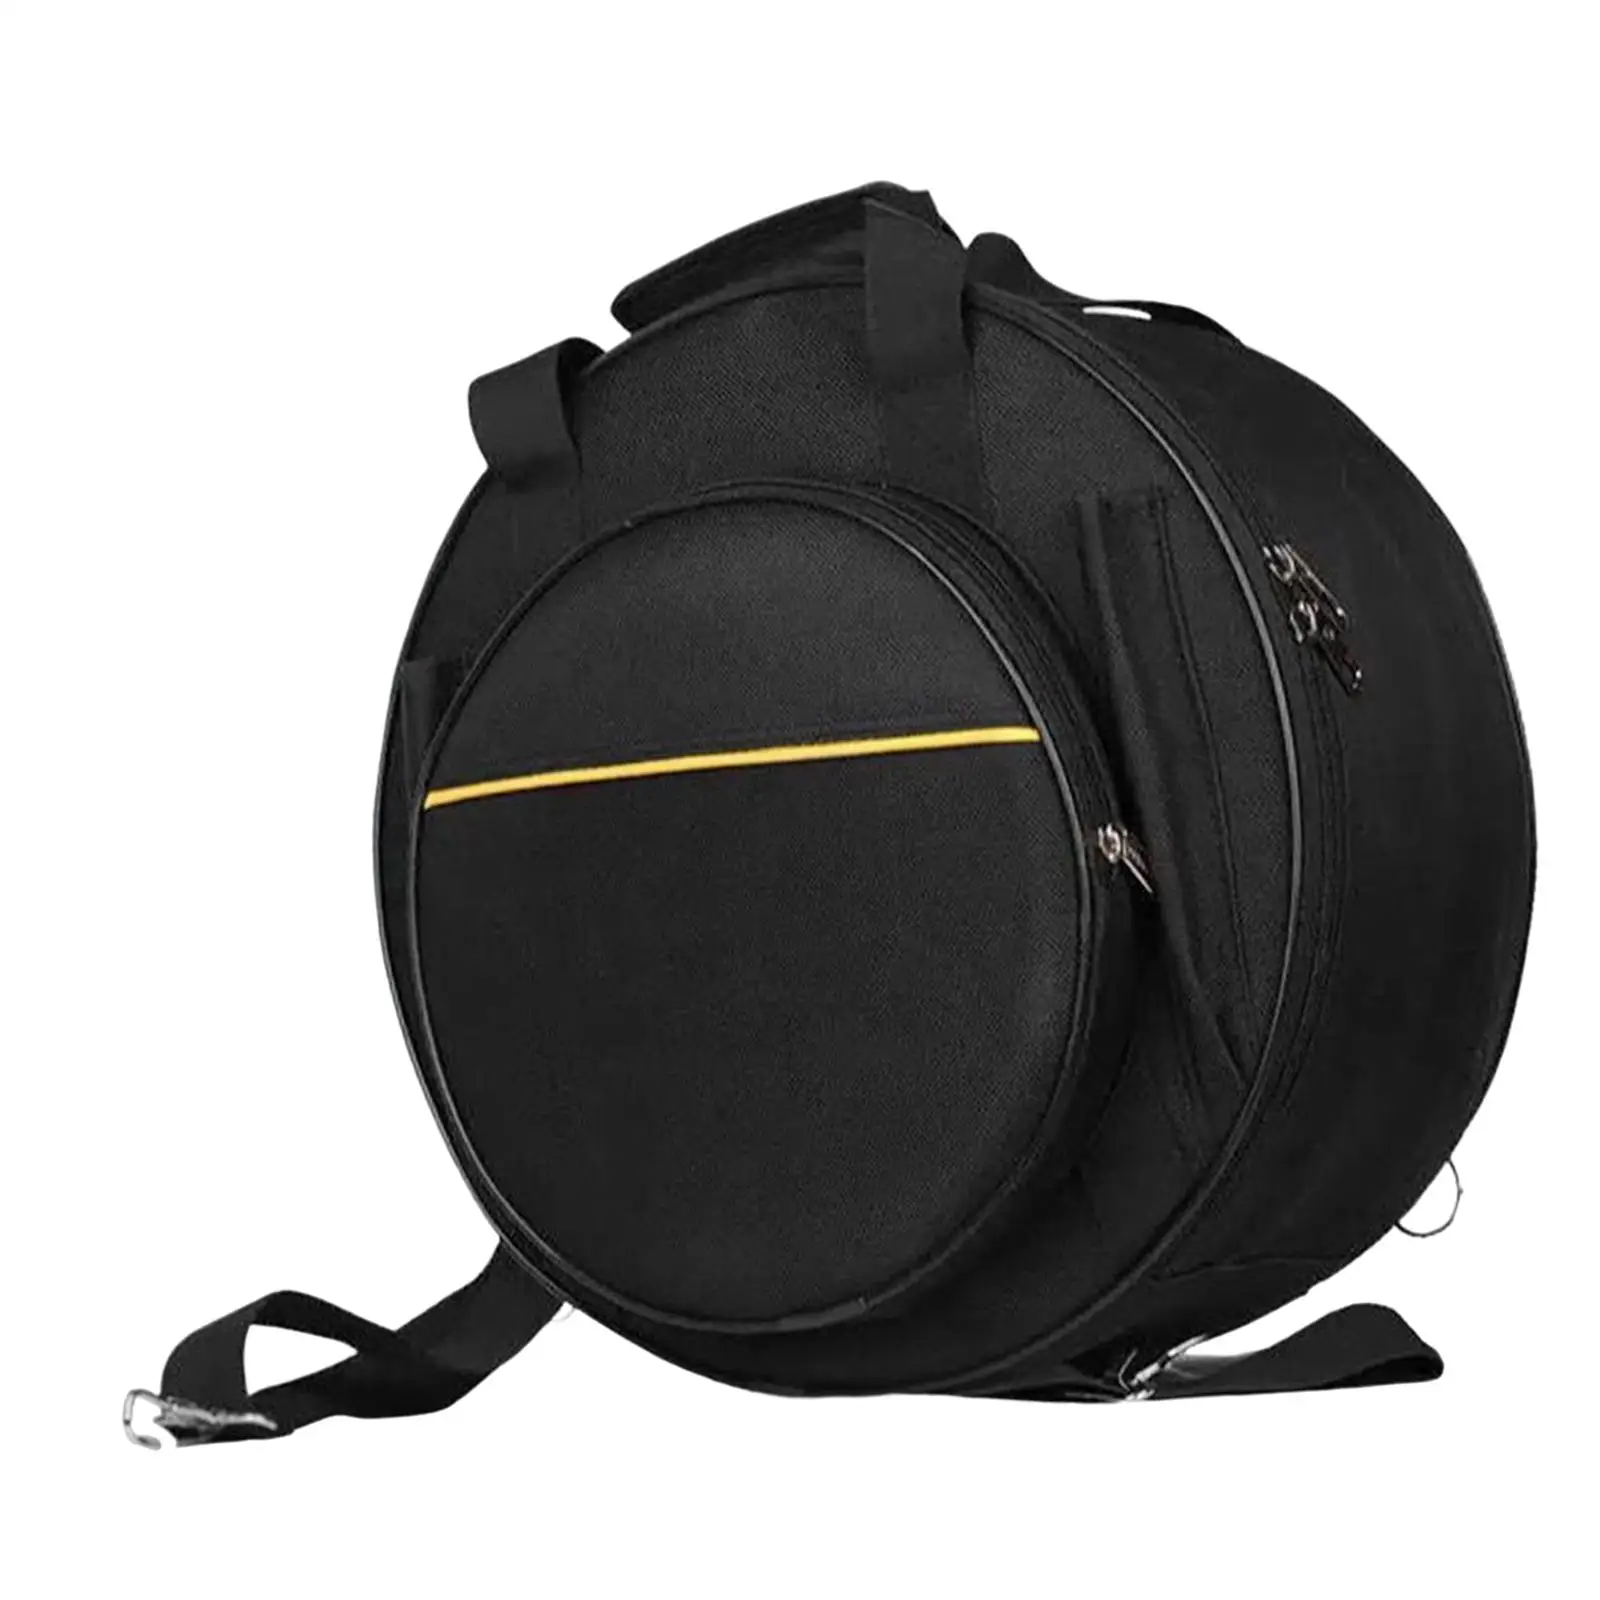 Waterproof Snare Drum Backpack with Carry Handles Percussion Storage Accessory Adjustable Strap Snare Drum Bag for Show